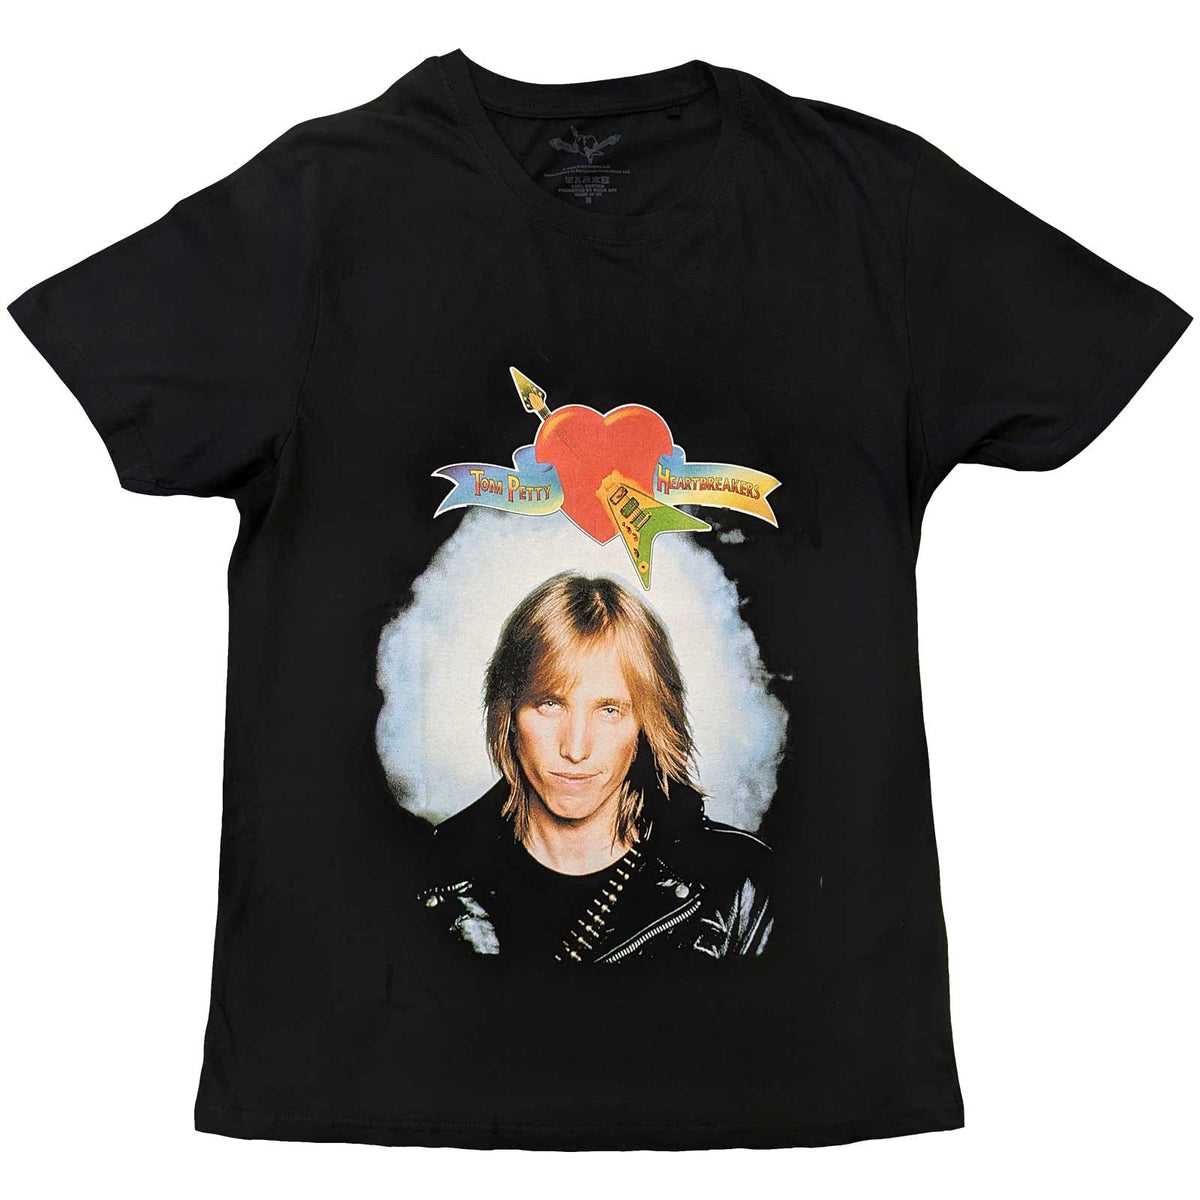 Tom Petty & the Heartbreakers Unisex T-Shirt - 1st Album- Official Product